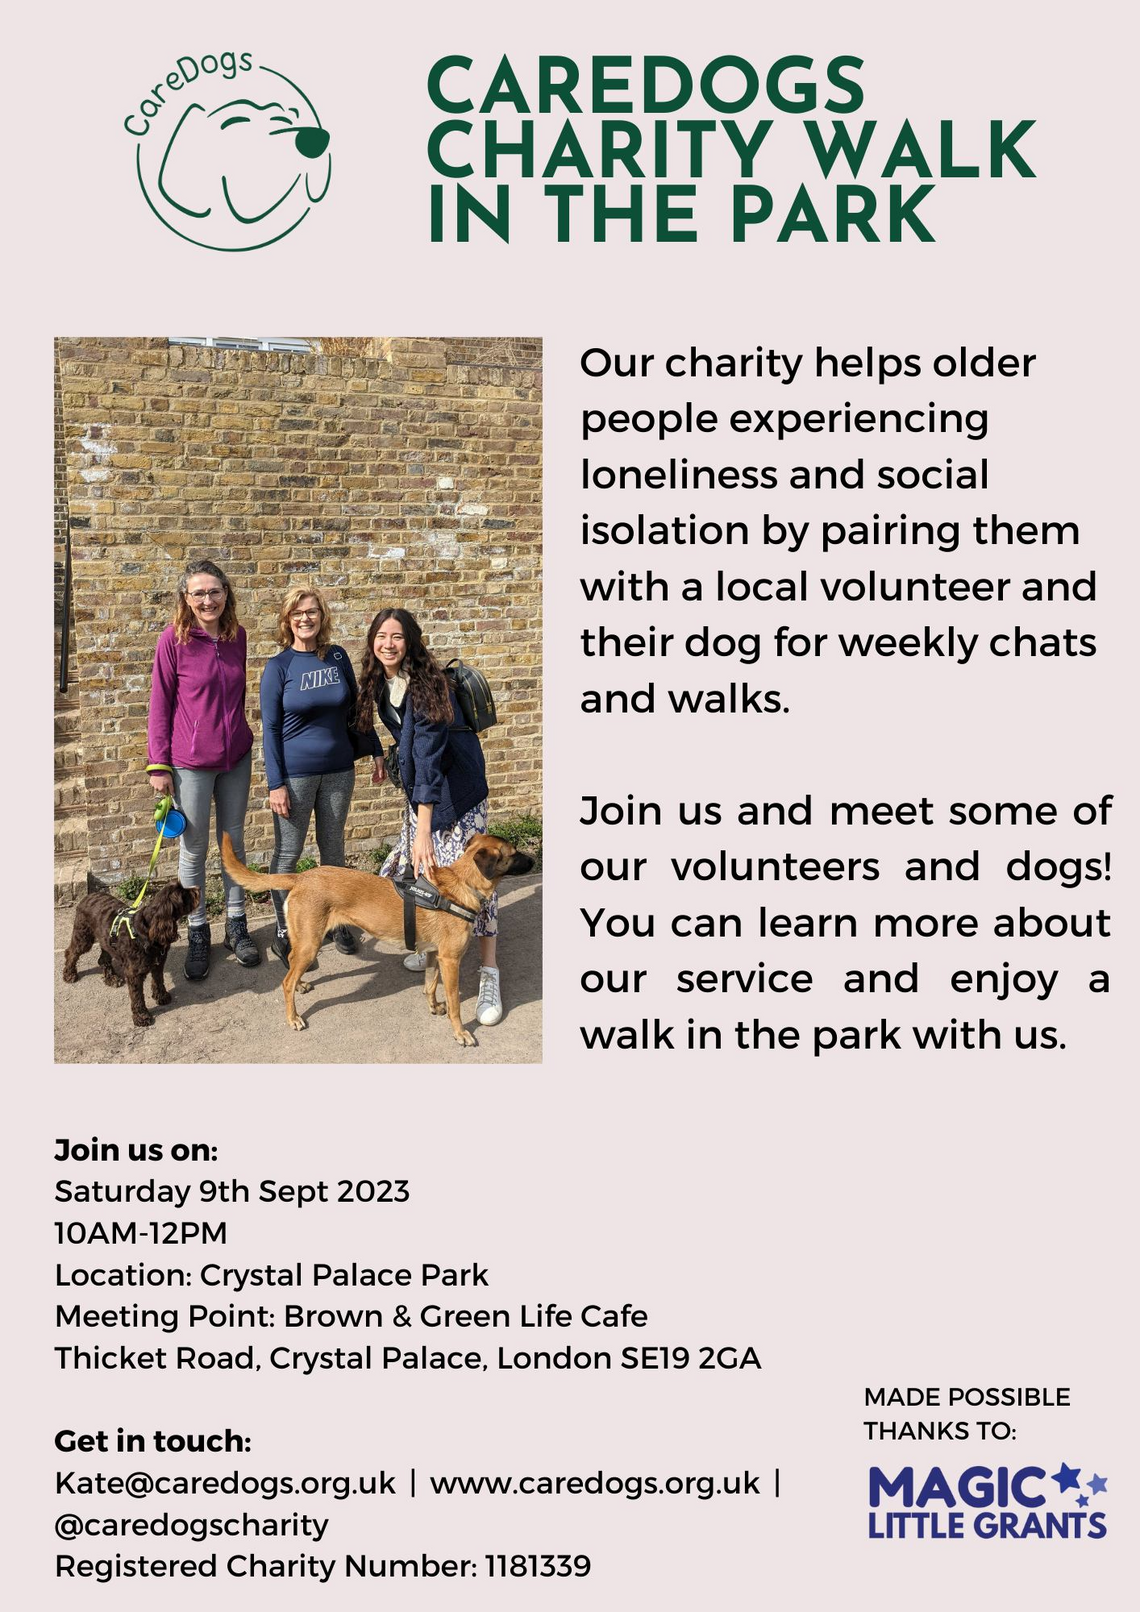 Caredogs Charity Walk in the Park